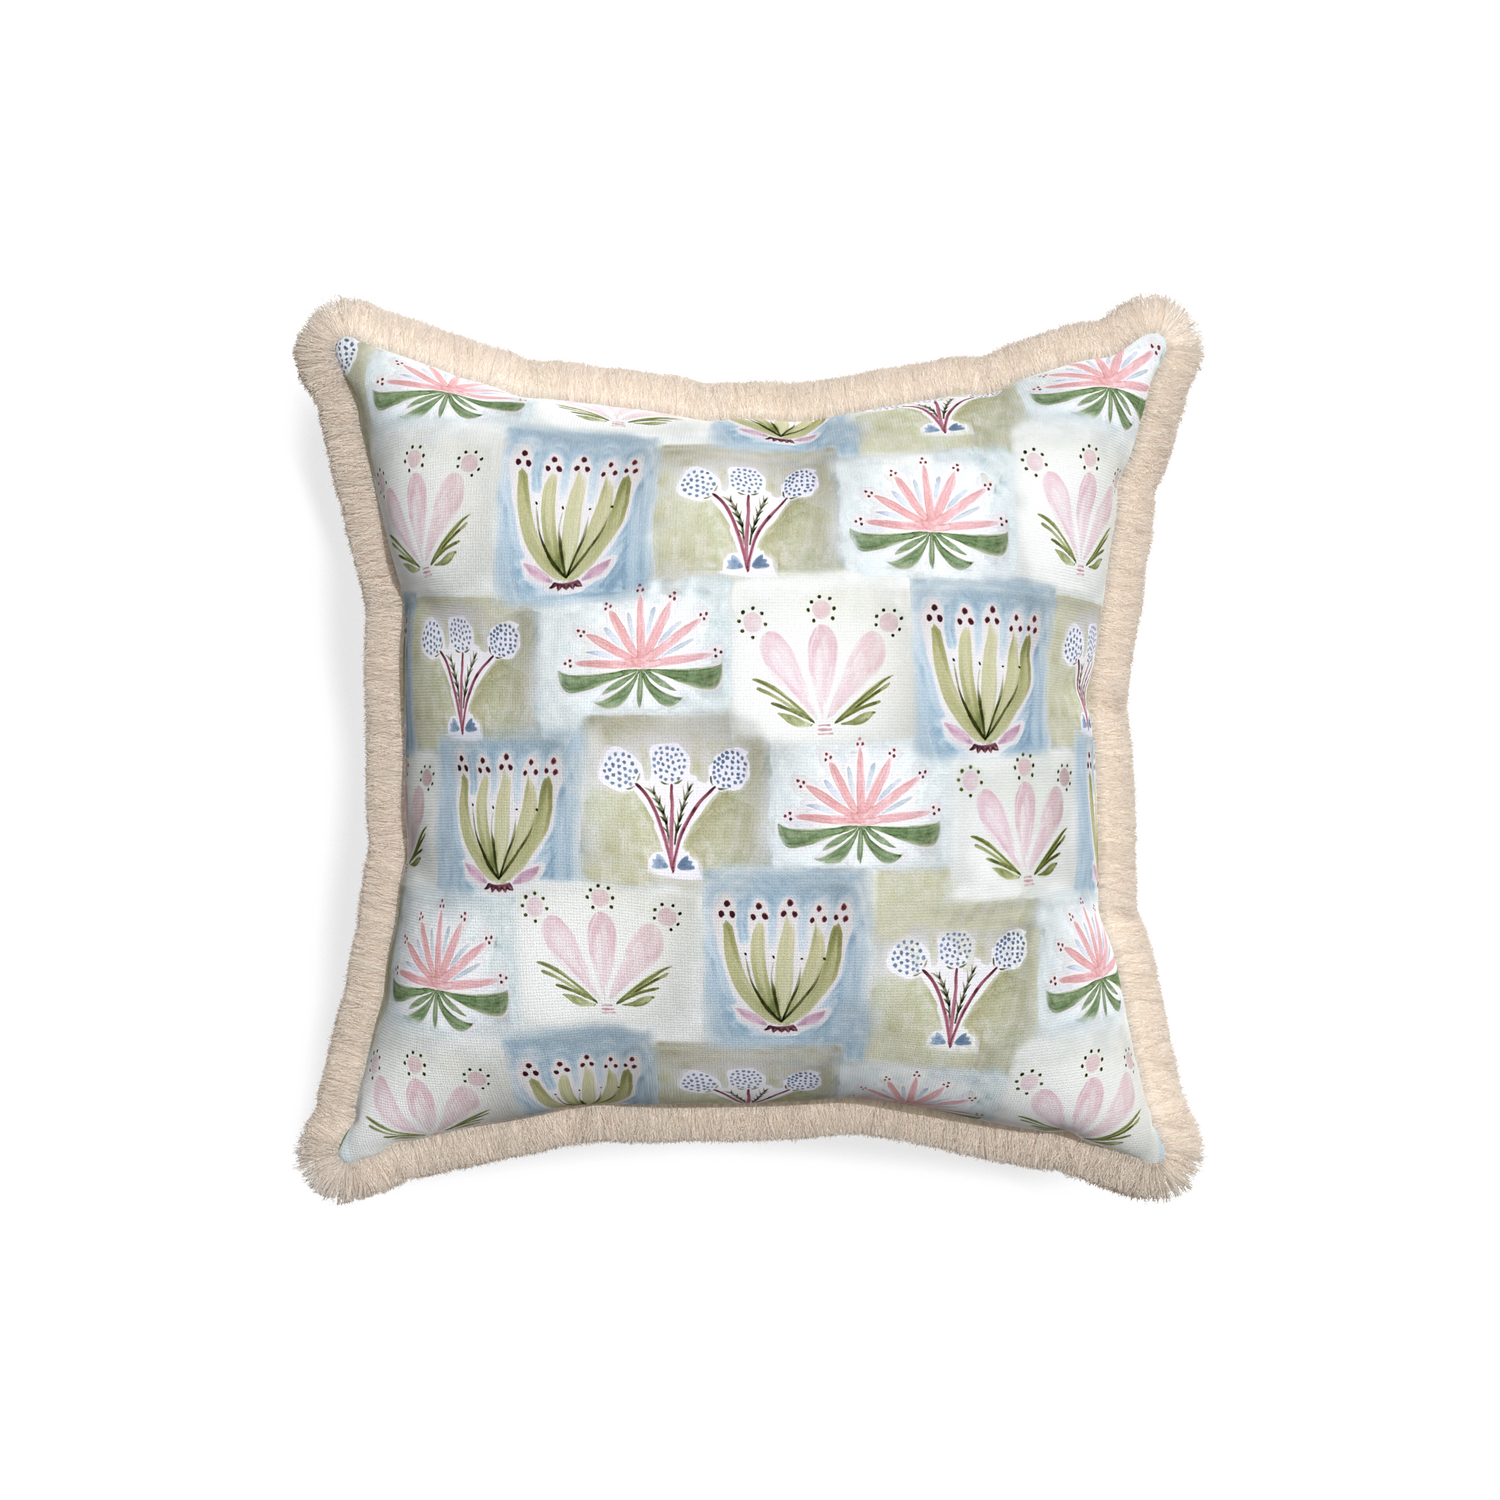 18-square harper custom hand-painted floralpillow with cream fringe on white background